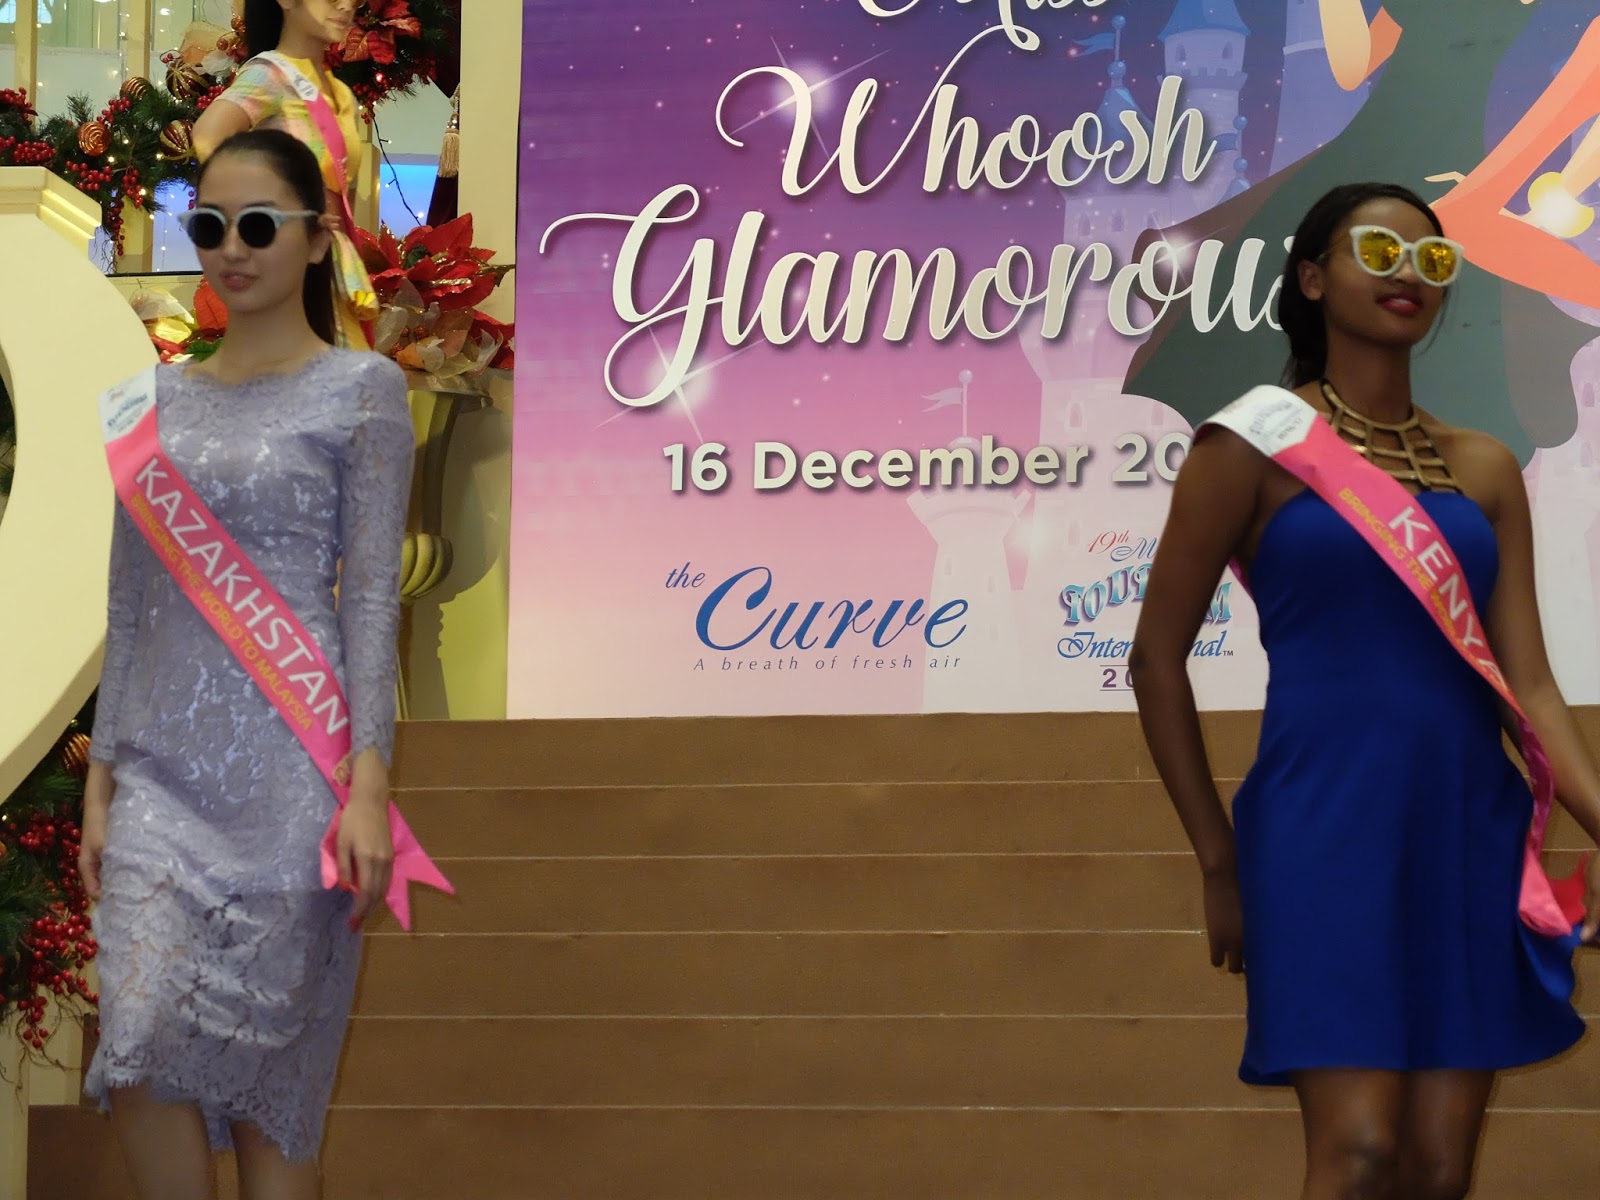 Kee Hua Chee Live!: MISS WHOOSH GLAMOUROUS 2016/17 WAS WON BY MISS